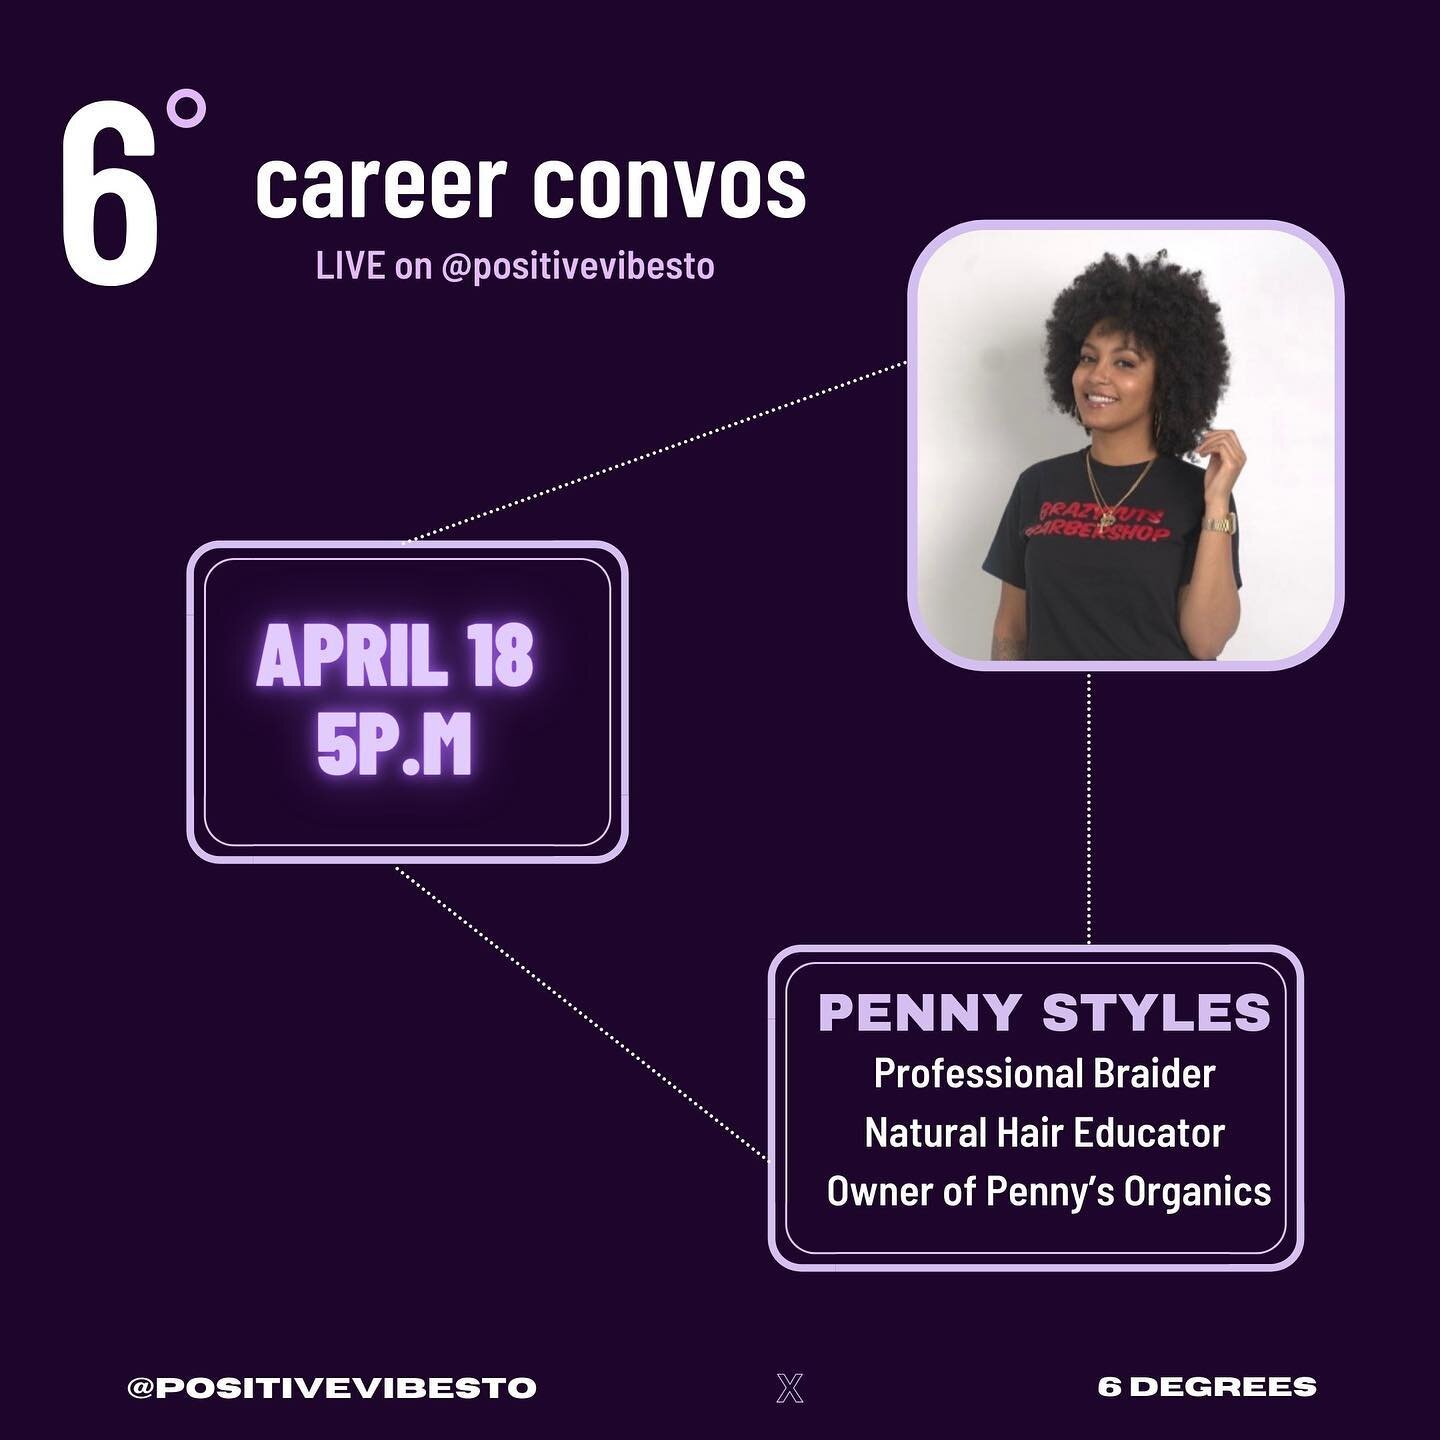 Tomorrow at 5pm we will be LIVE with the very talented @_pennystyles discussing the natural hair industry, how to grow a successful start-up business, and creating multiple streams of revenue with your passions! 

Join us LIVE on @positivevibesto